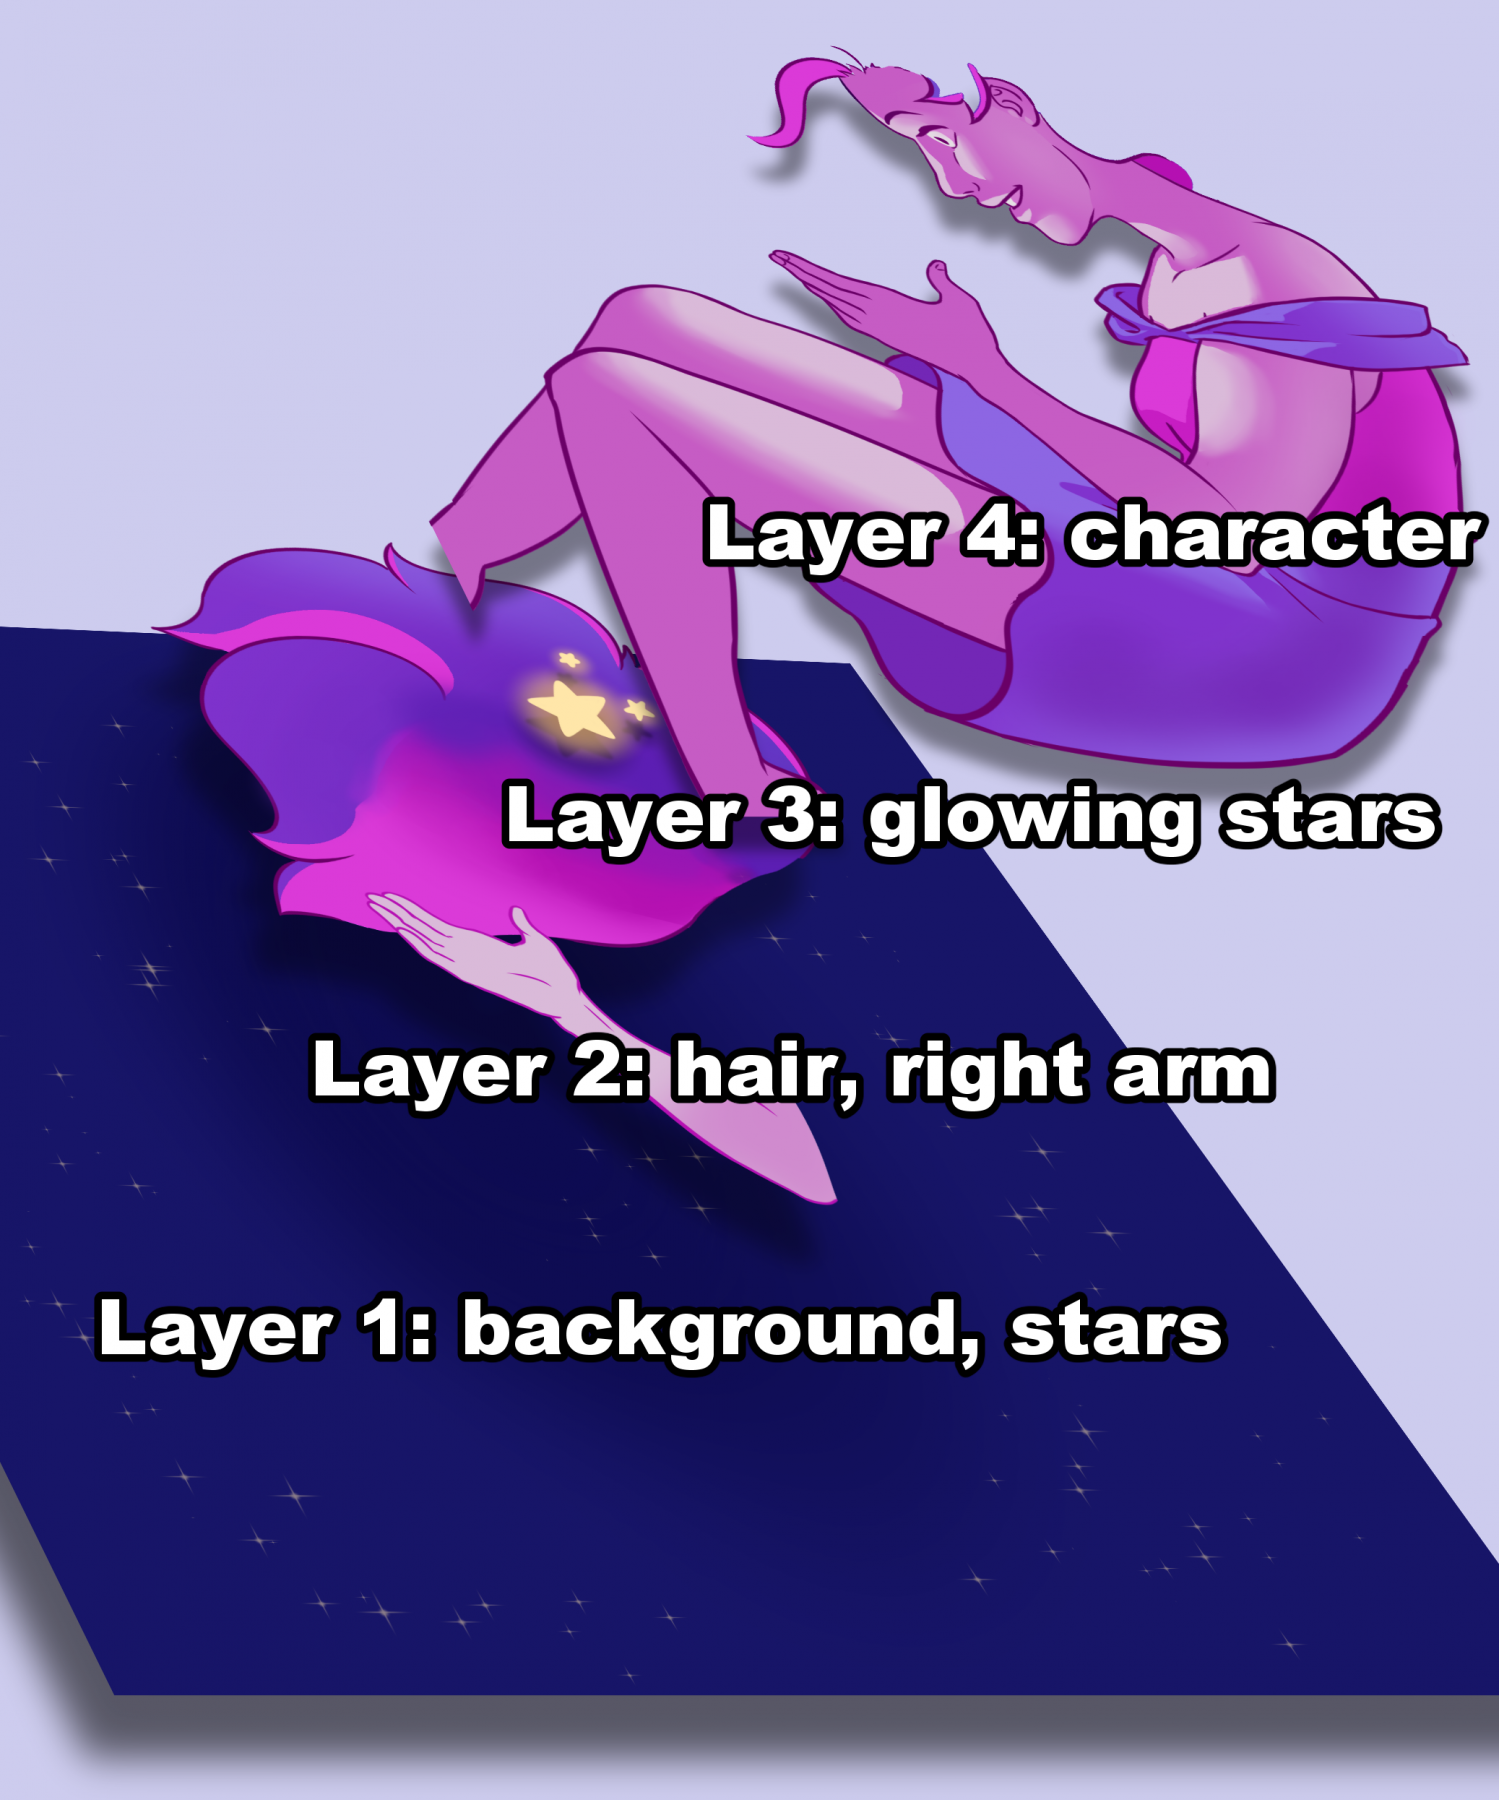 Showing each of the final layers. Layer 4: character, Layer 3: glowing stars, Layer 2: hair, right arm, Layer 1: background stars